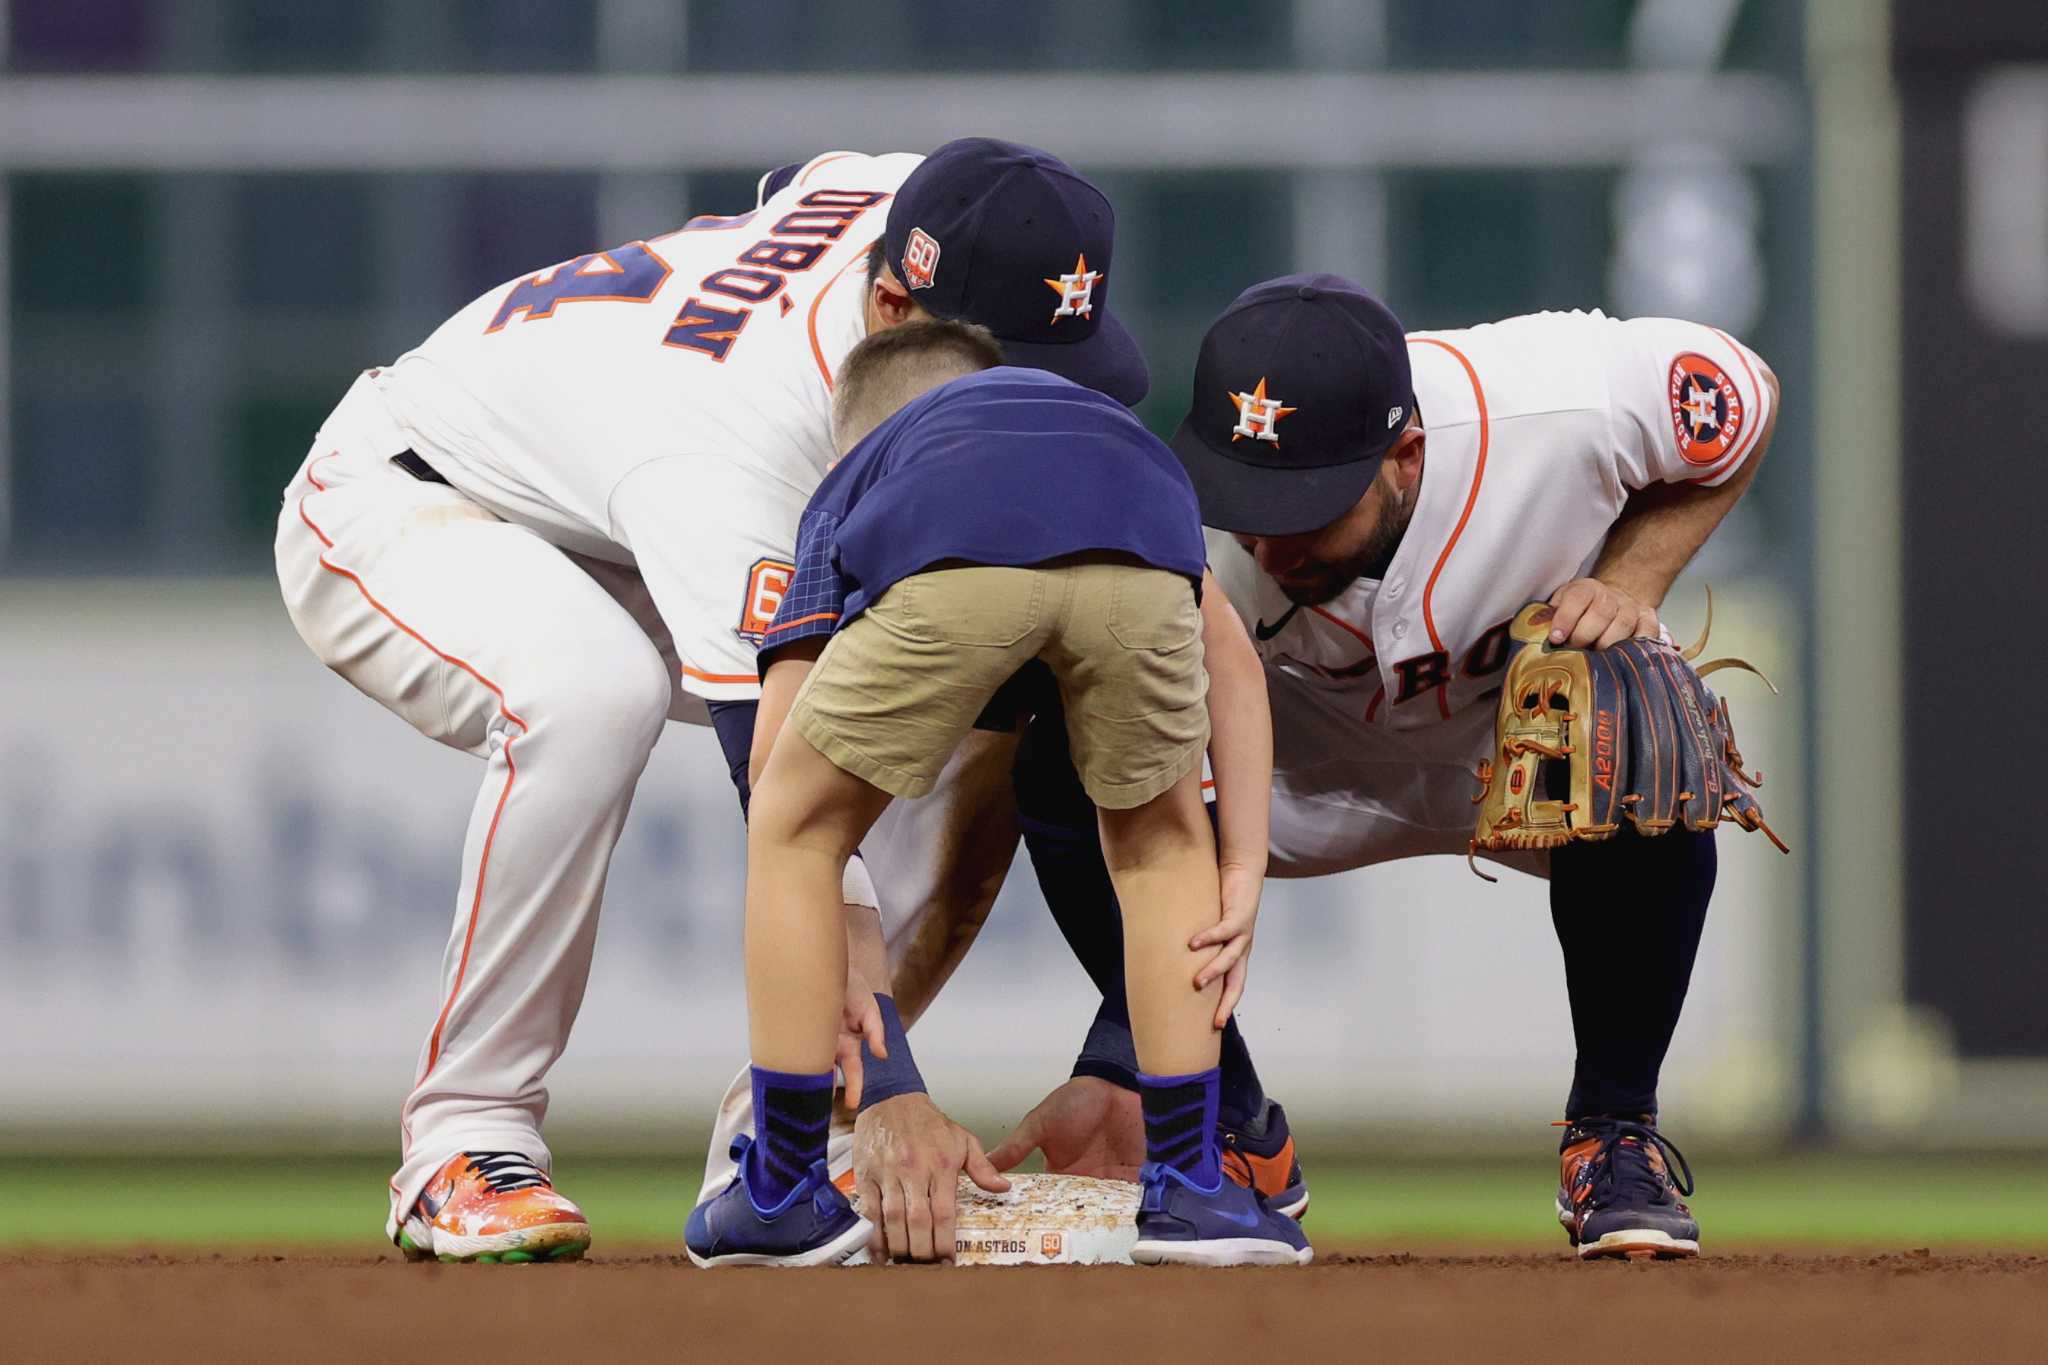 The Astros Beat the Team That Put Up a Statue of His Dad—and He Loves It